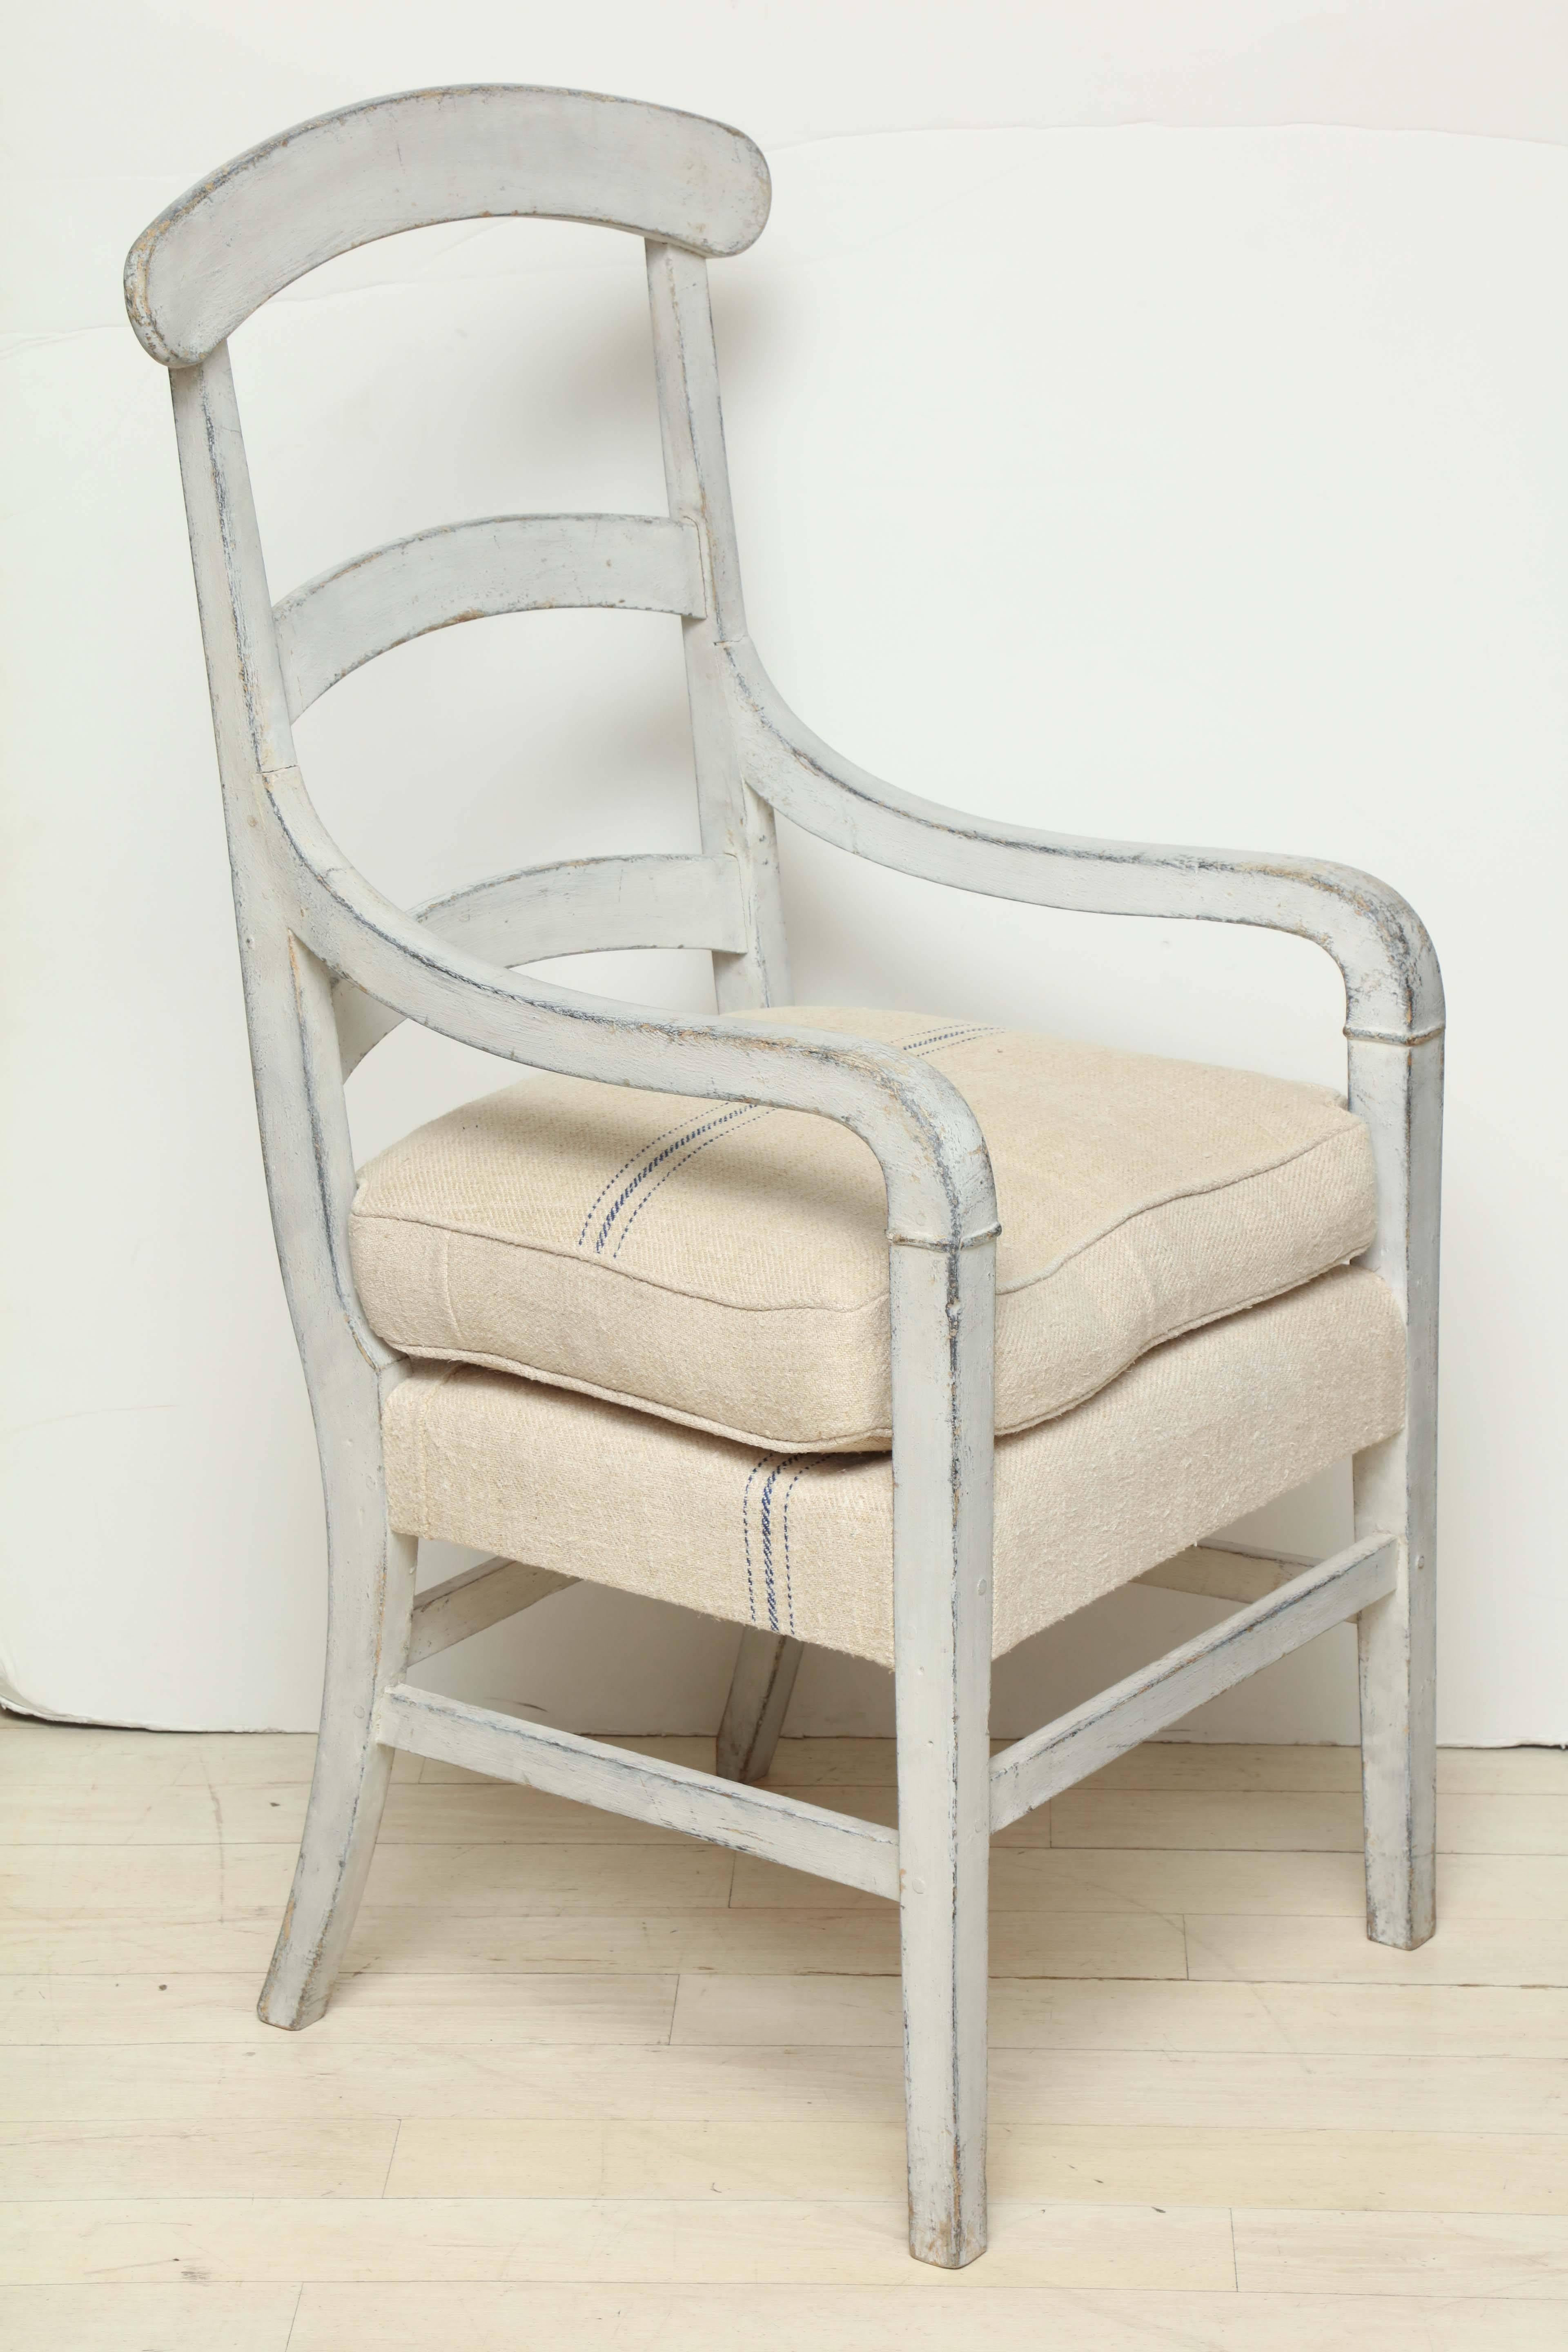 19th Century French Ladder Back Painted Wood Arm Chair with Linen Cushion For Sale 2